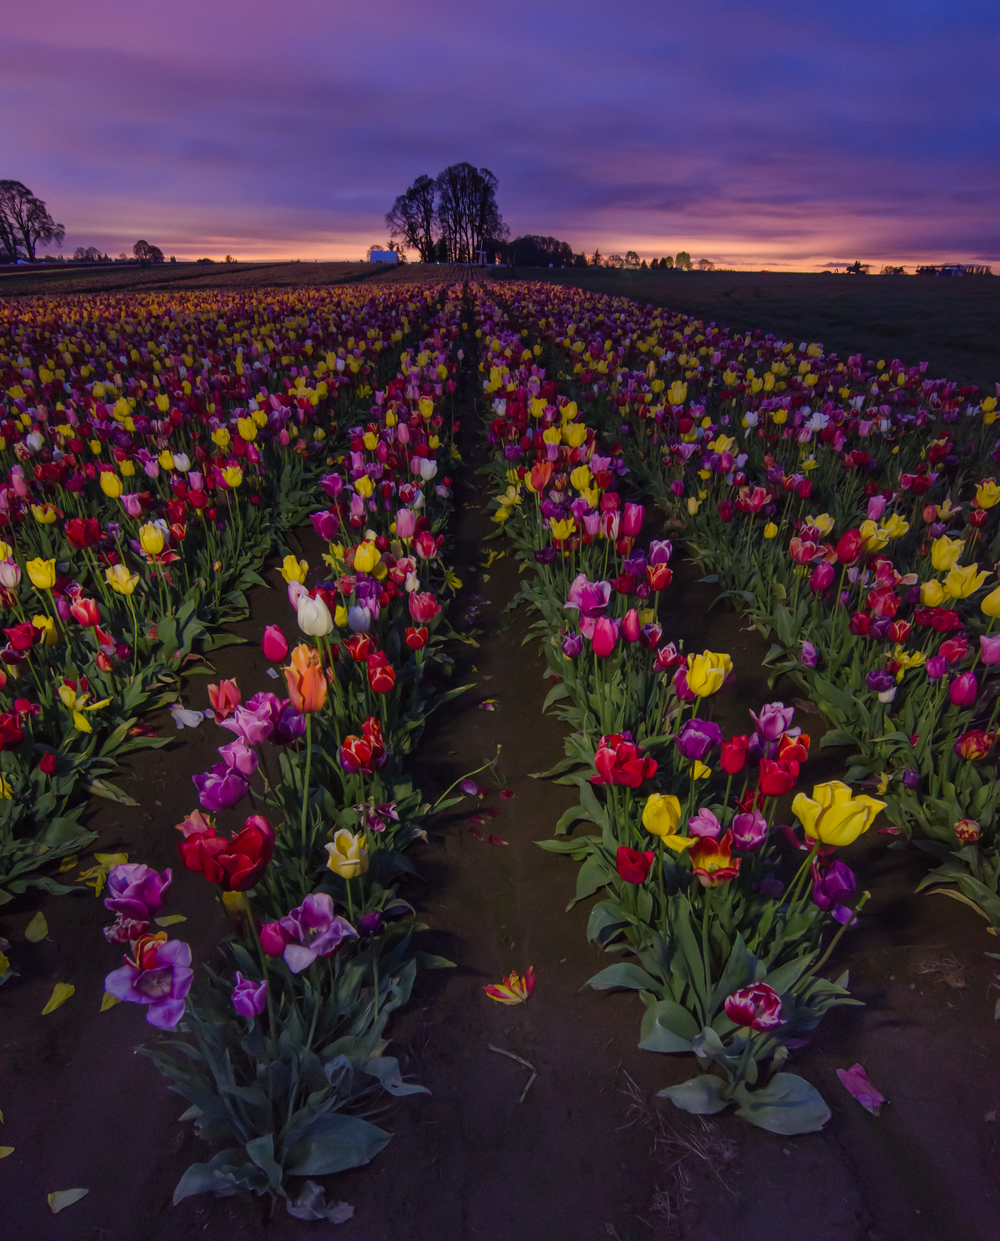  A shot before sunrise looking down some rows of various colored tulips. 